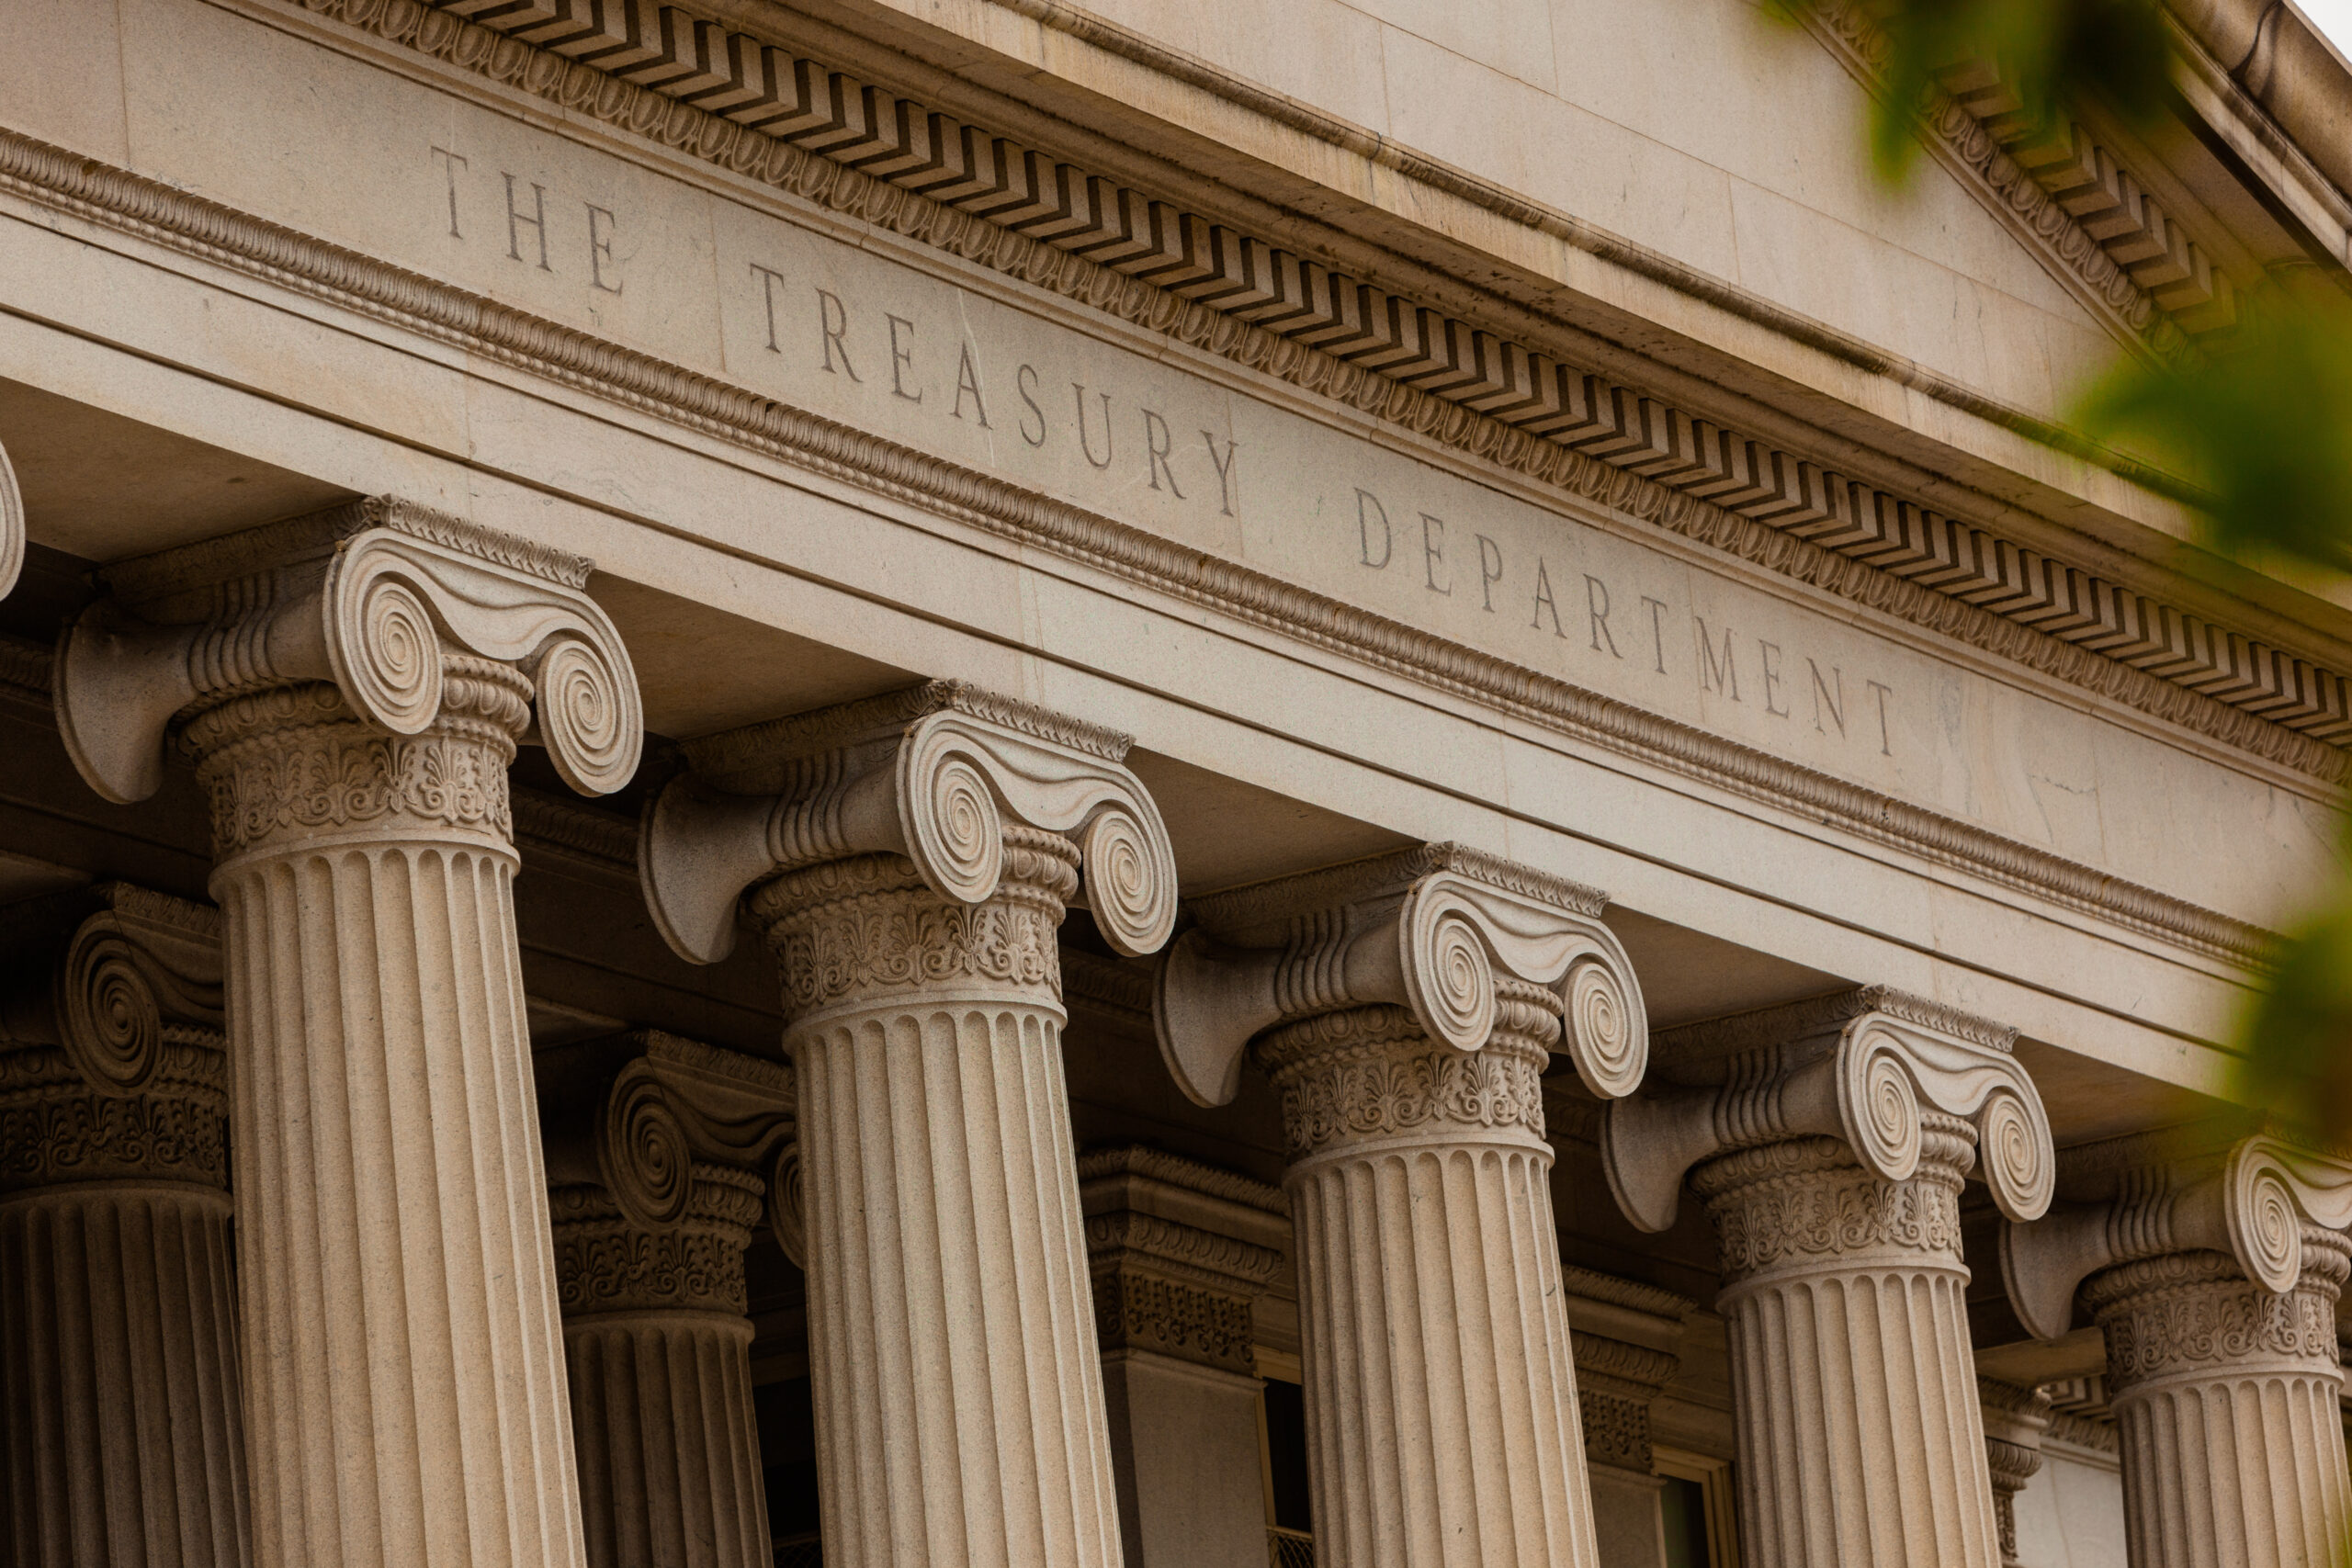 Exterior of US Treasury building with columns and text reading "The Treasury Department"